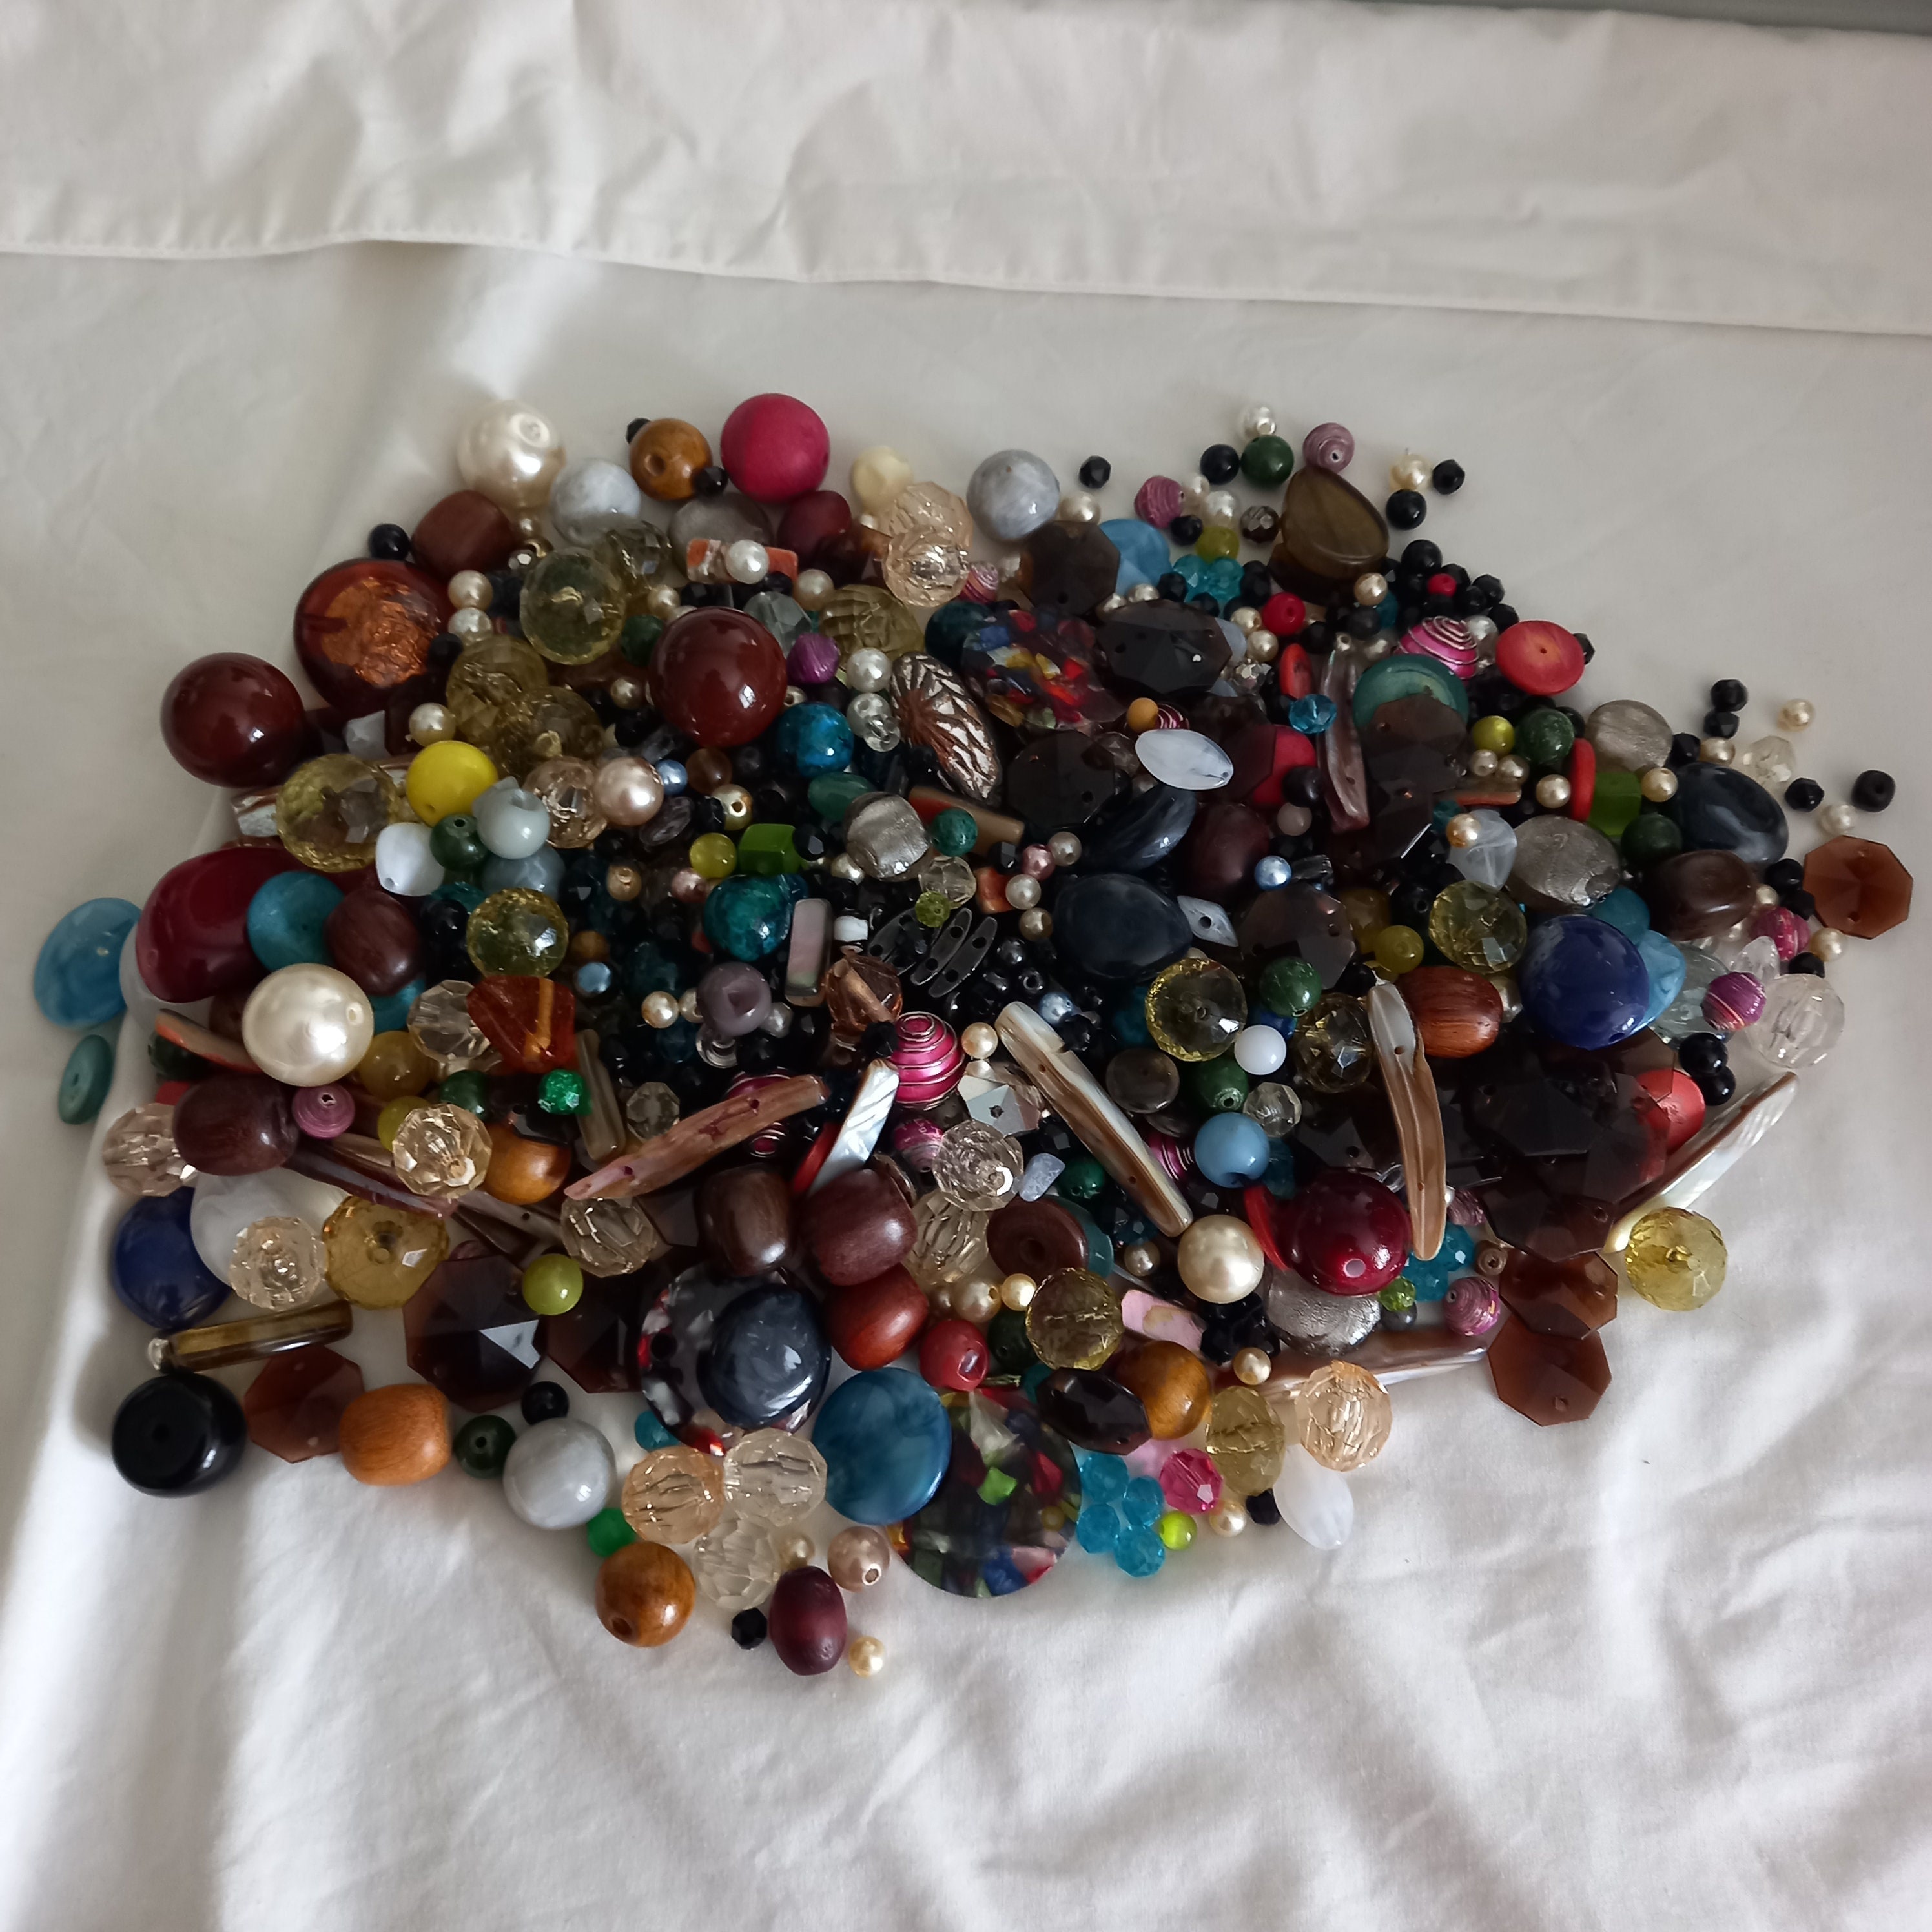 Glass Beads 500g / 1kg Mixed Crystal Bead Mix 4mm to 30mm Round